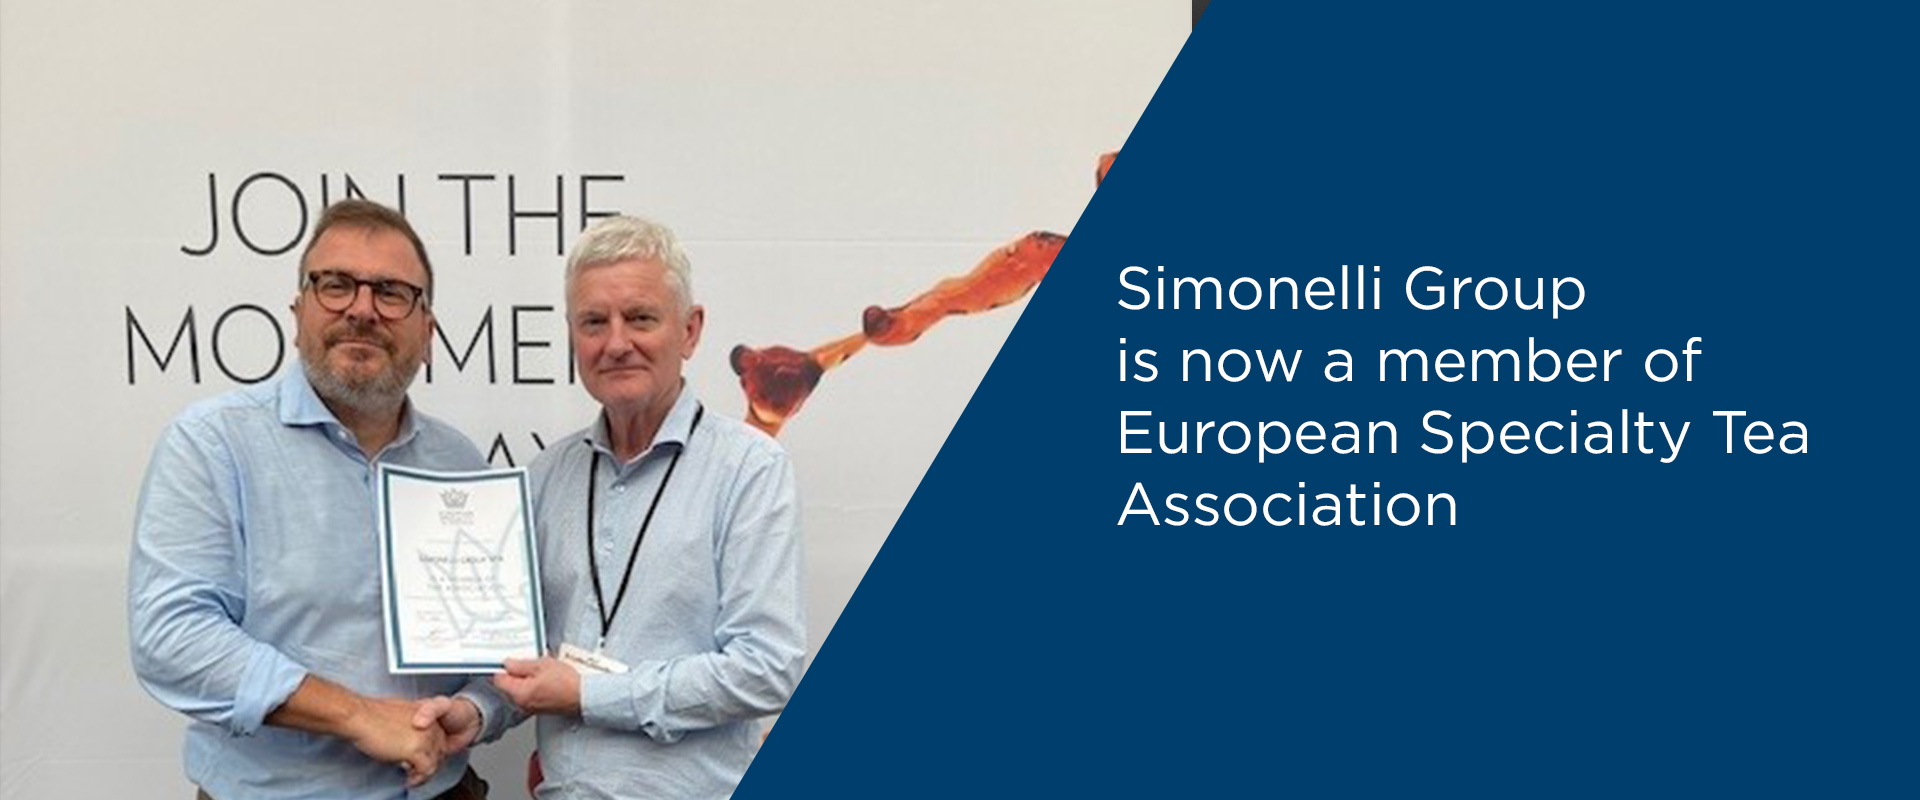 European Speciality Tea Association welcomes Simonelli Group as member of the association